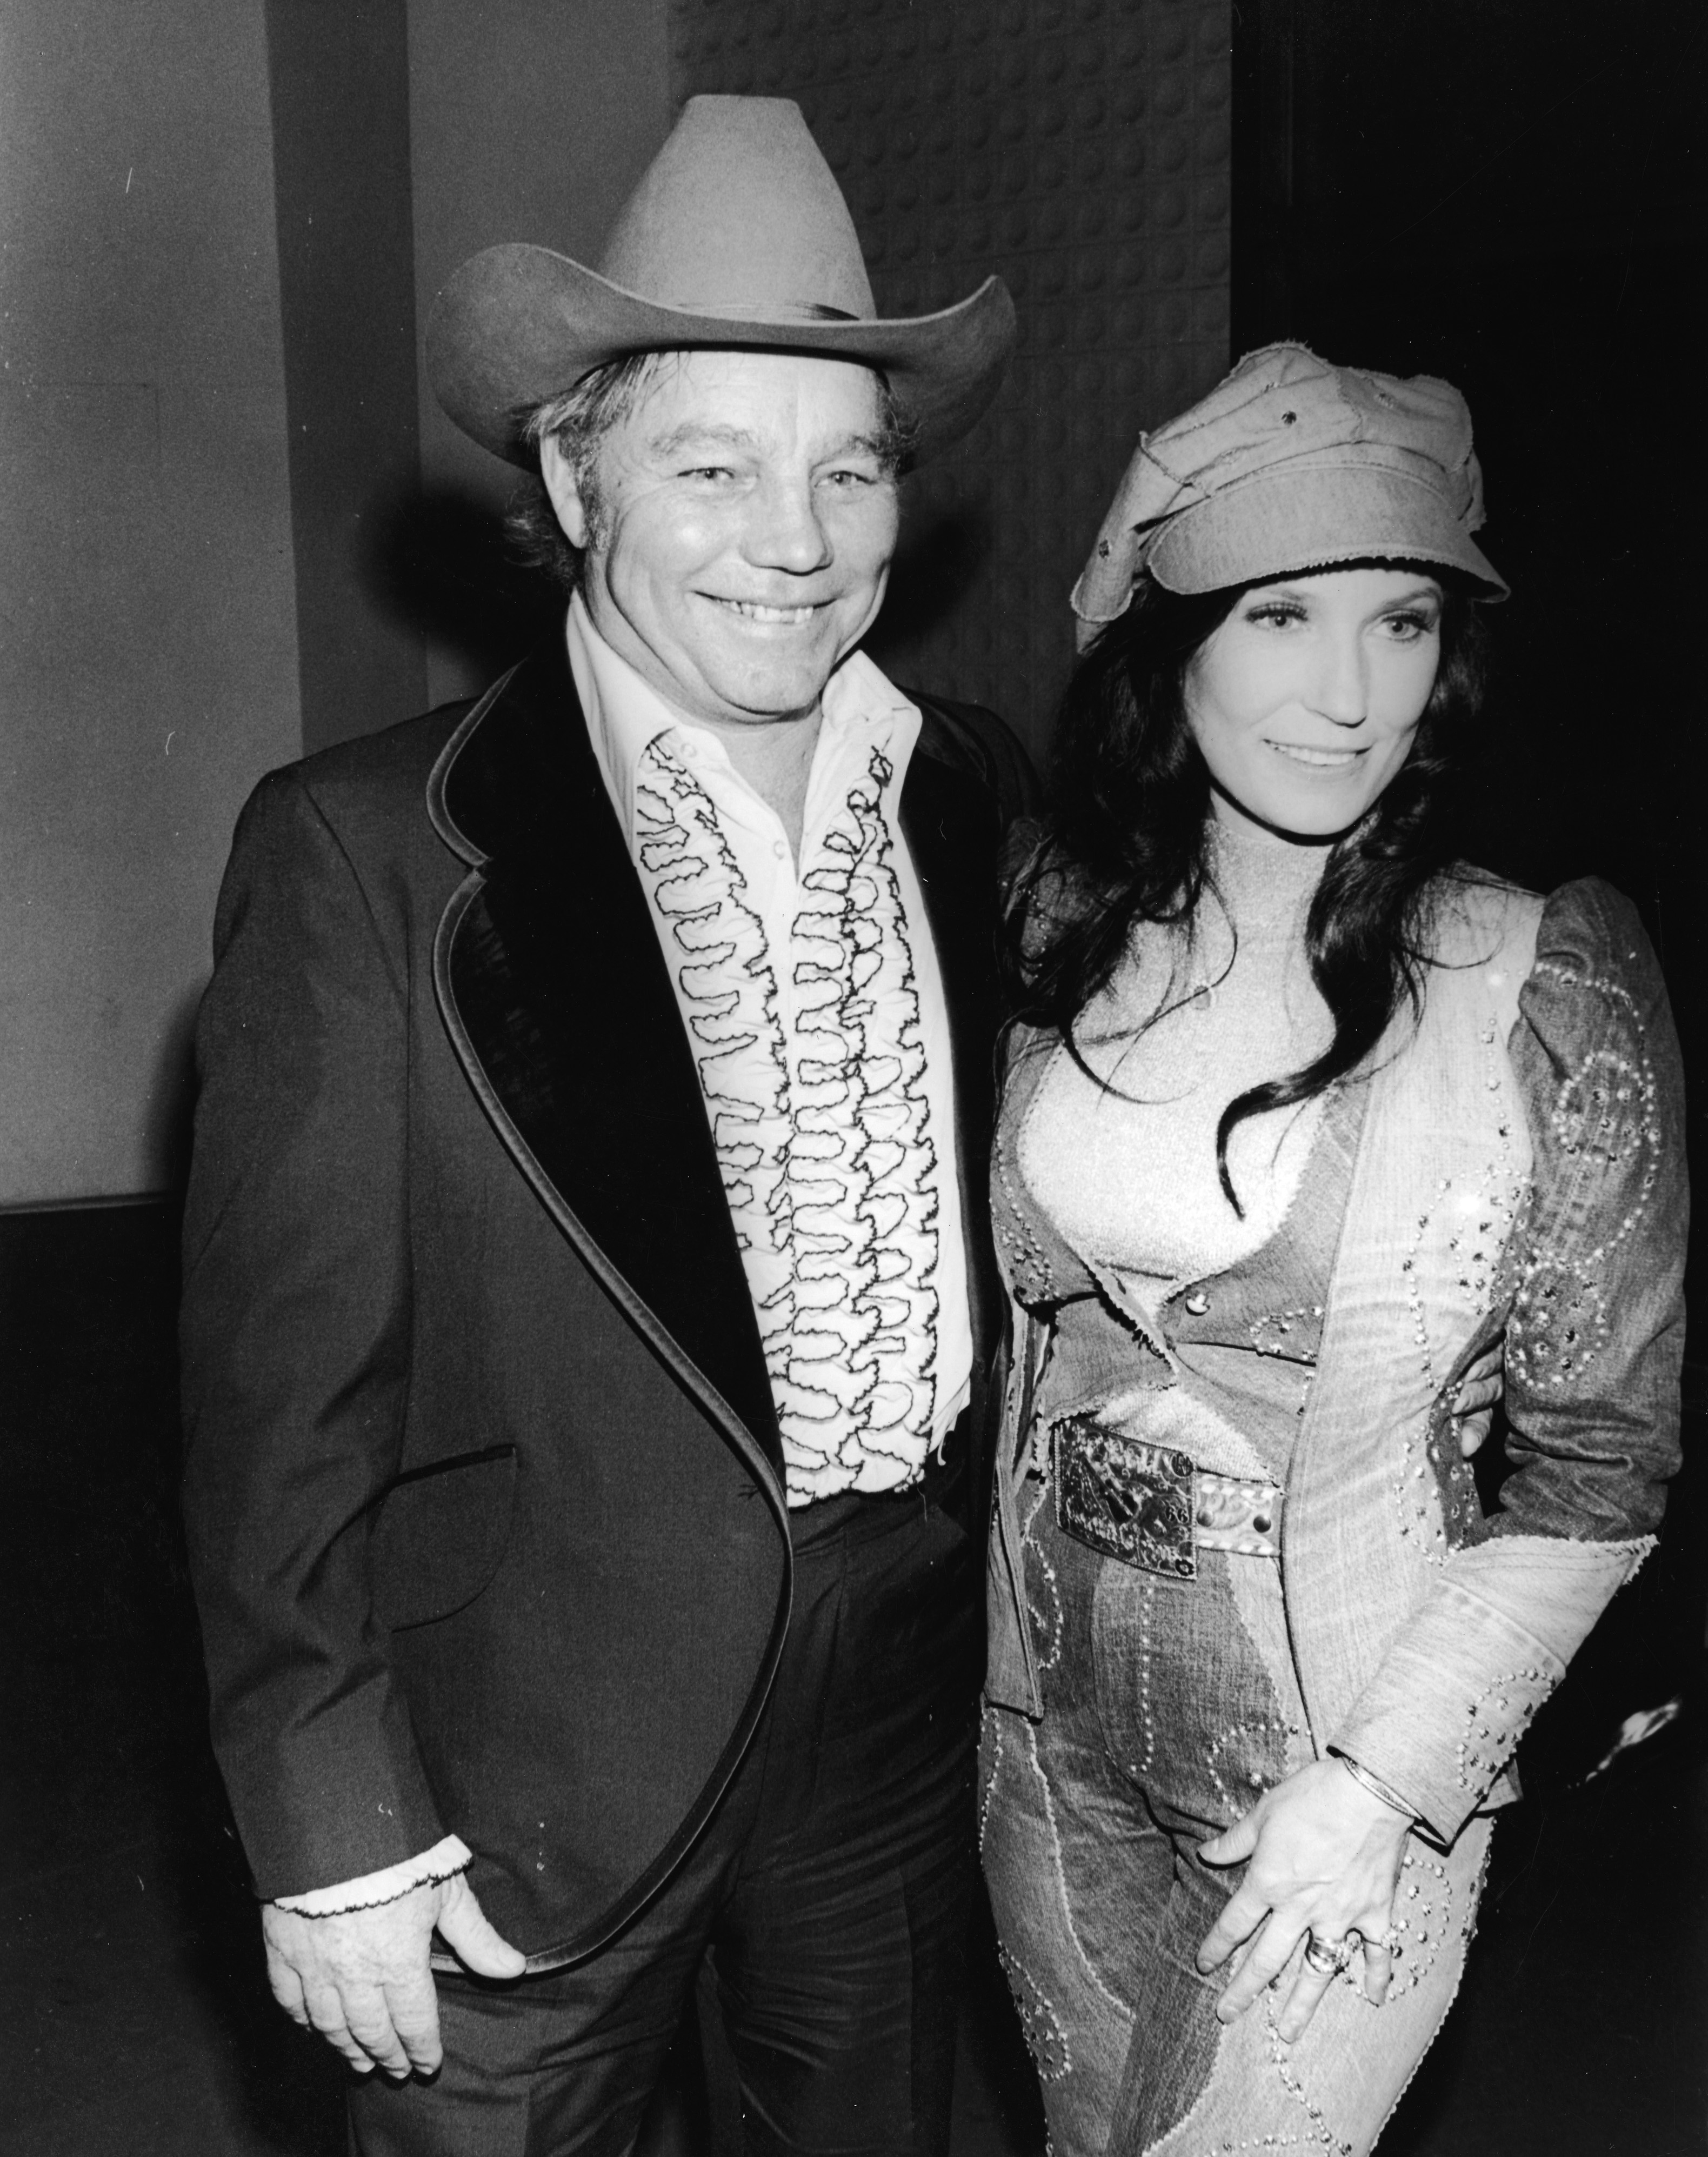 Loretta Lynn and her husband Oliver "Mooney" Lynn, at the Country & Western Music Awards, Hollywood, California, February 27, 1975 | Source: Getty Images